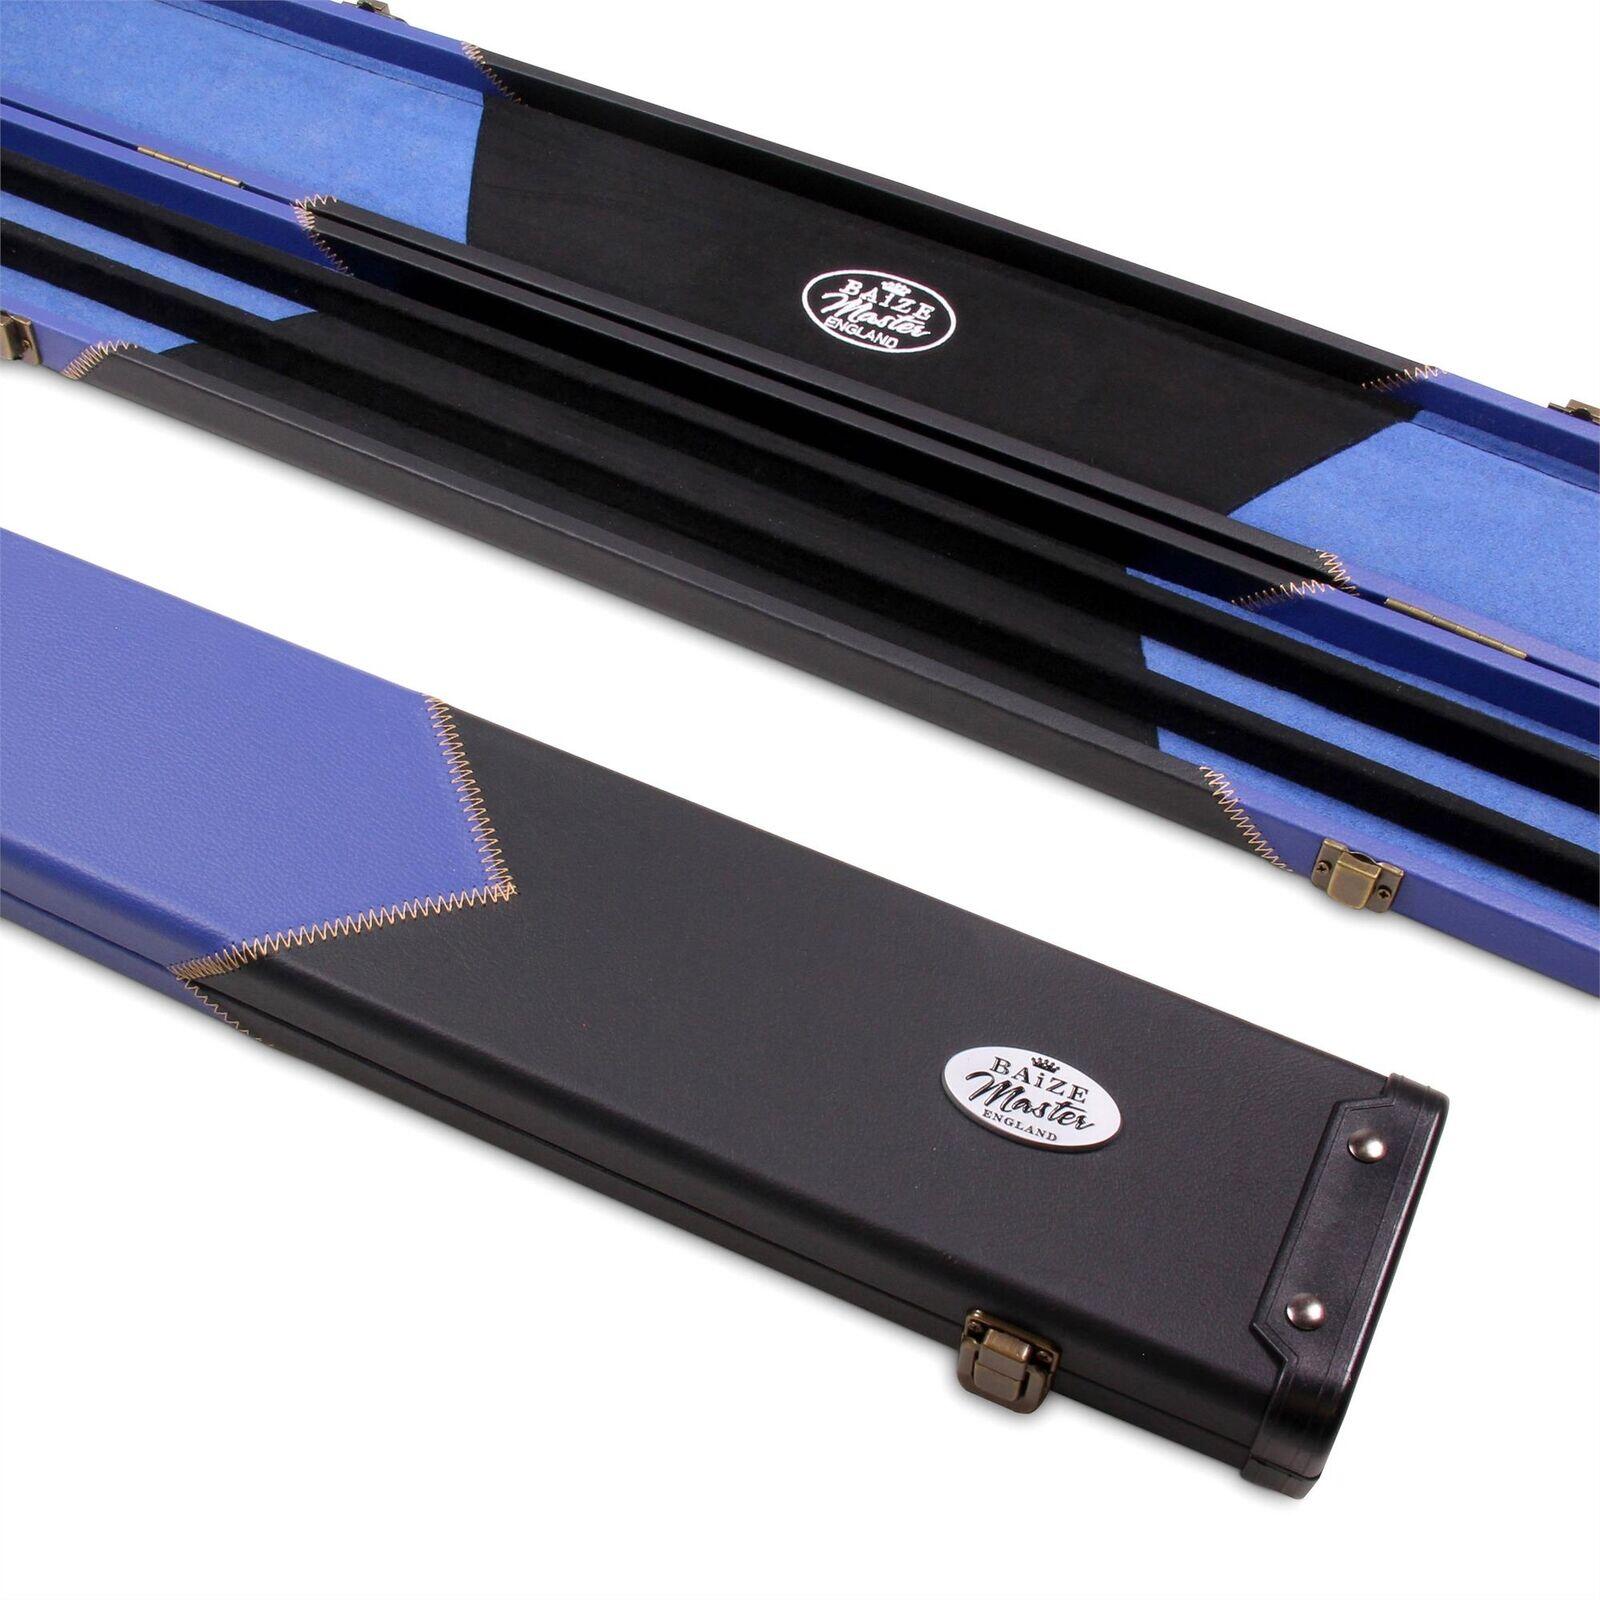 FUNKY CHALK Baize Master 1 Piece WIDE ROYAL BLUE ARROW Snooker Pool Cue Case - Holds 3 Cues